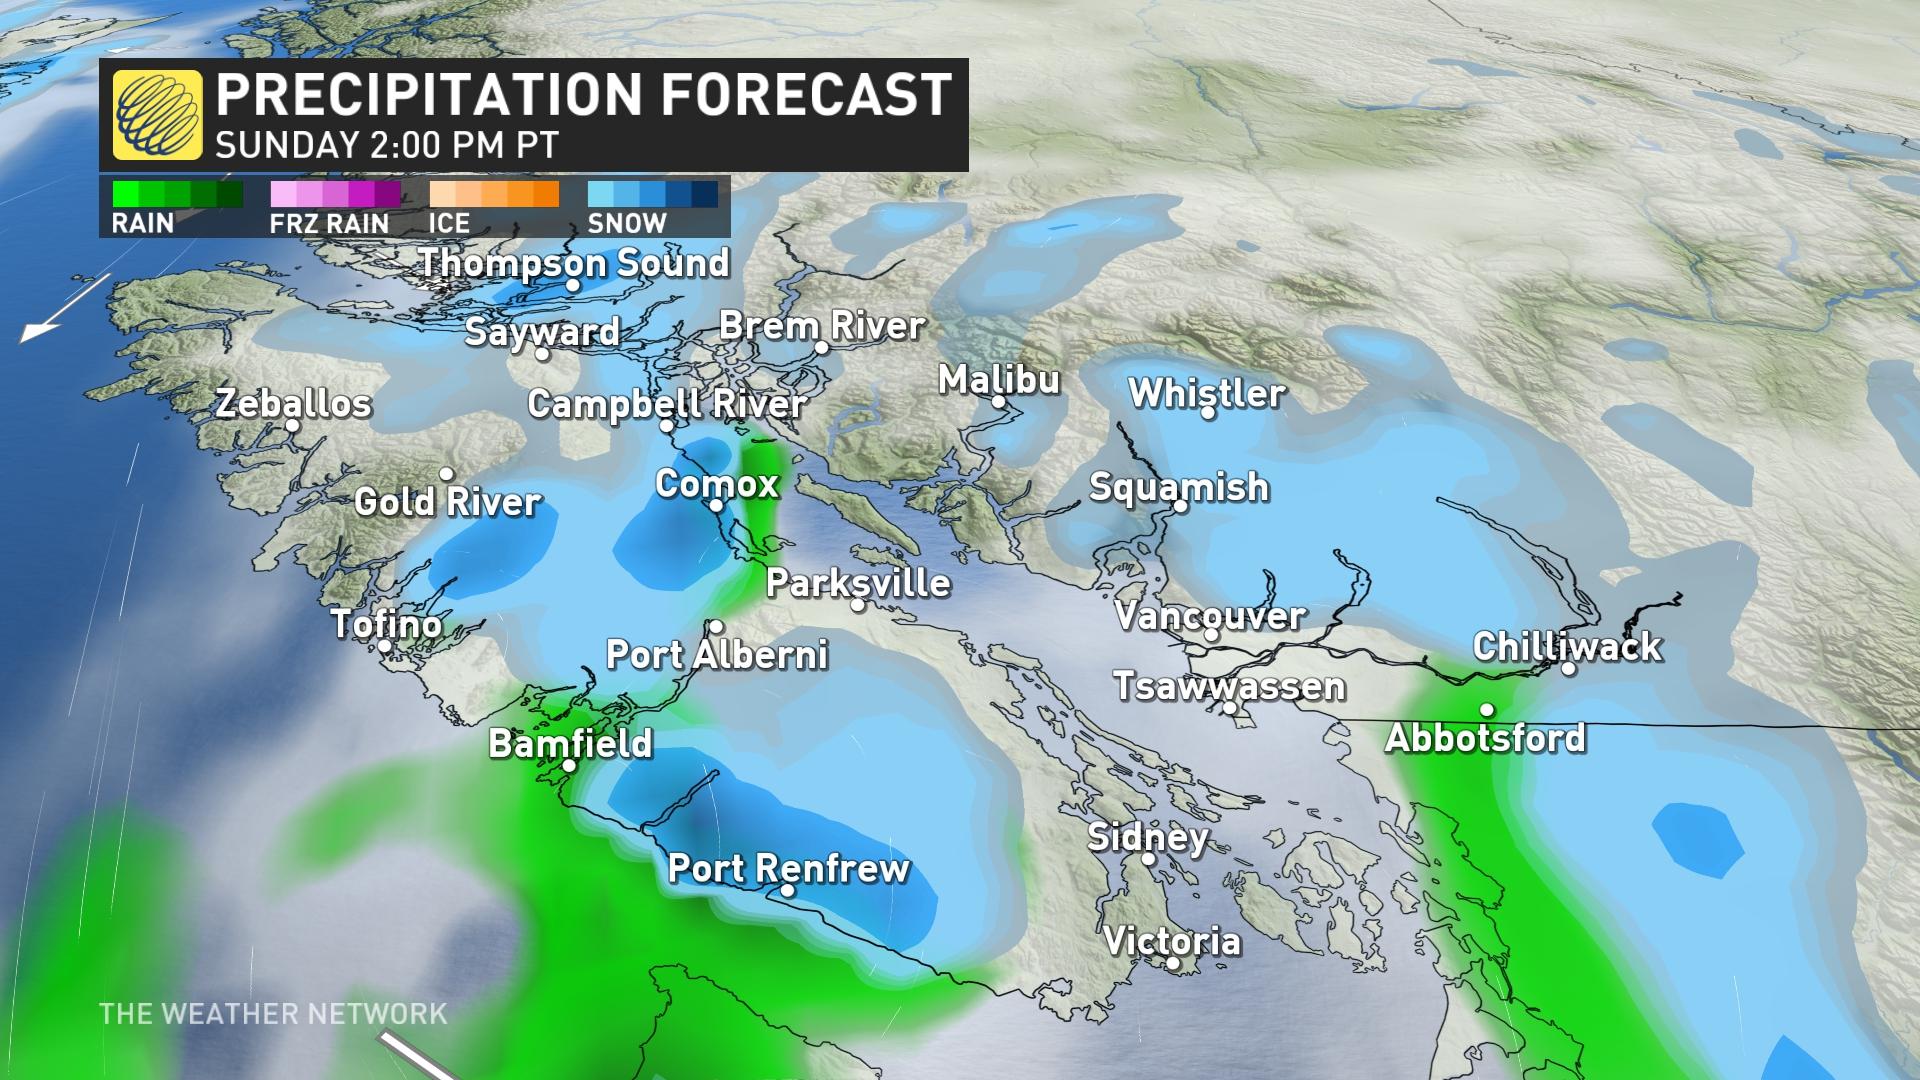 numerous chances of snow infiltrate the b.c. coast as low stays put